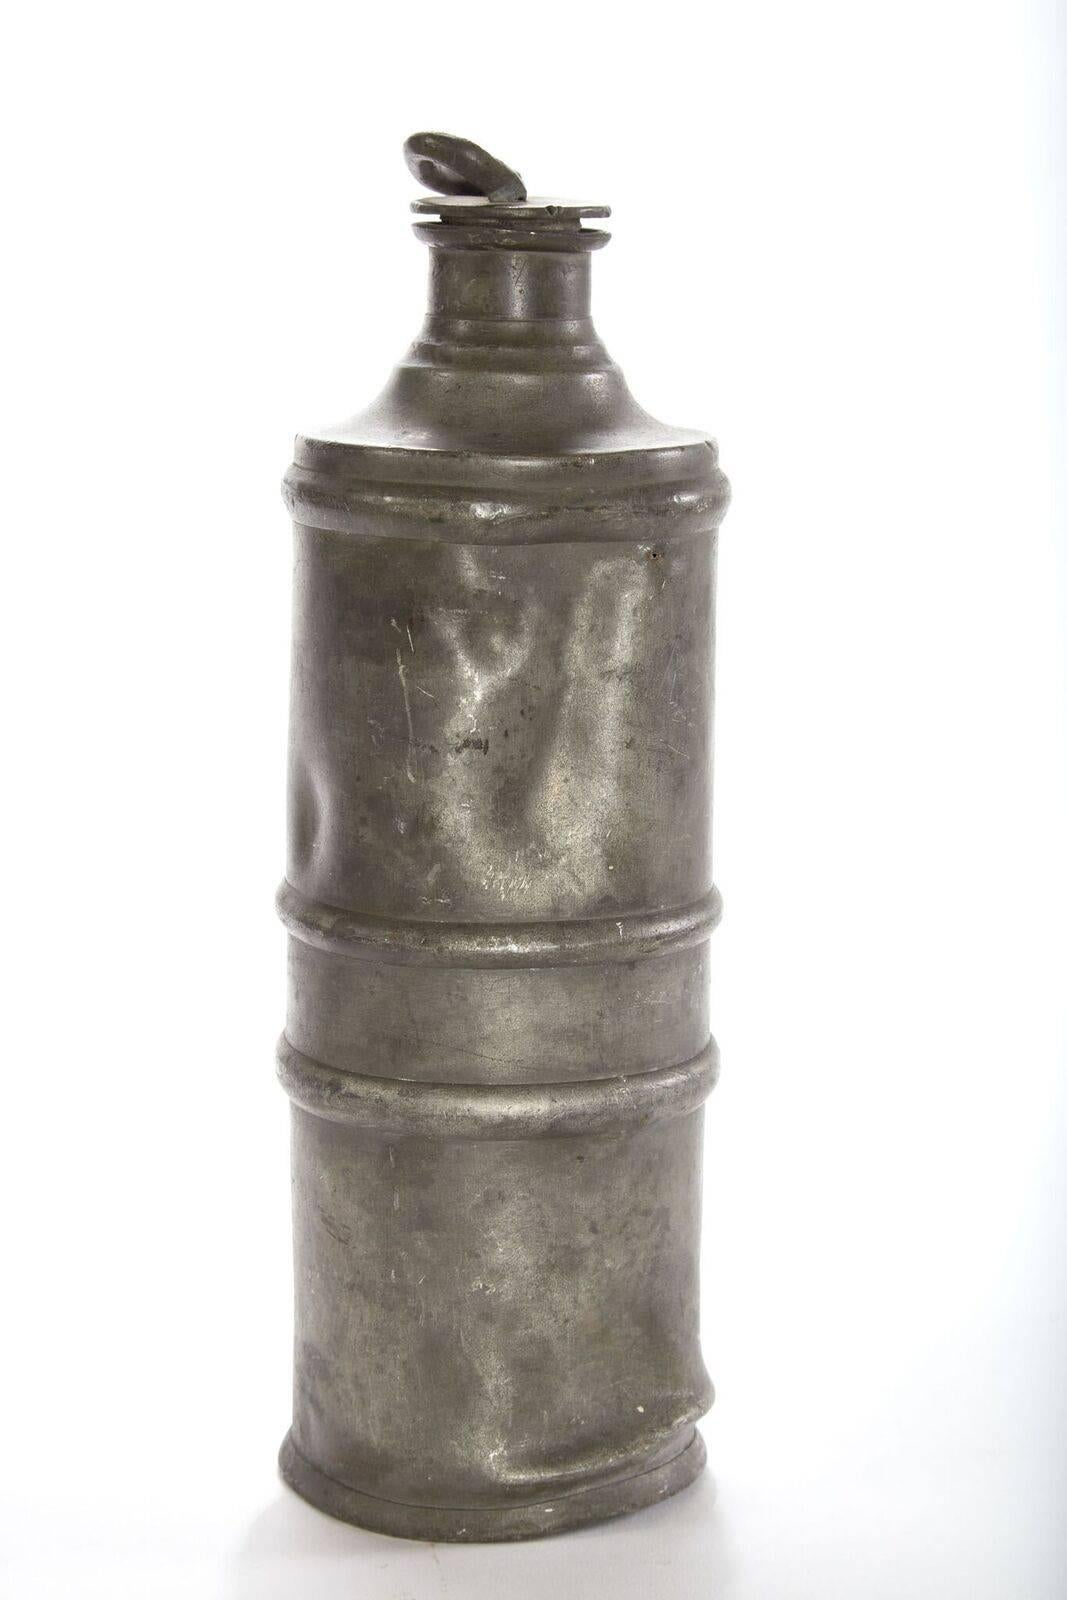 19th century pewter canister from Germany
Measure: 12.5 in height x 4 in diameter.